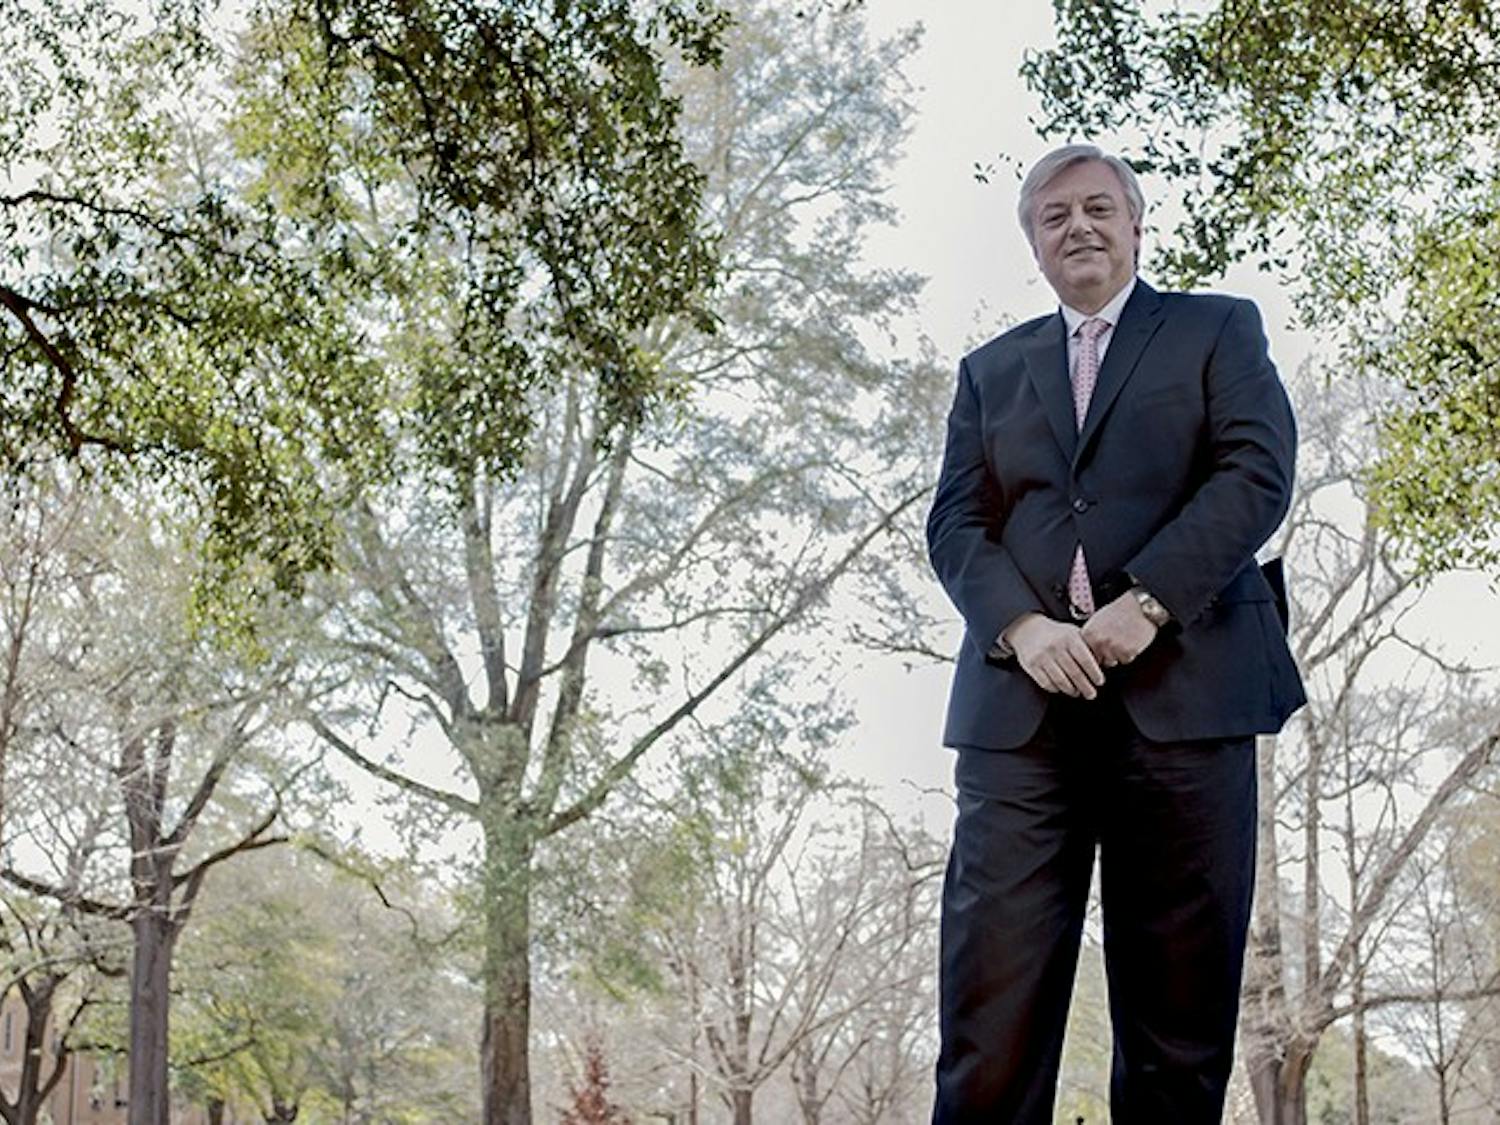 A photo of President Michael Amiridis in front of a nature scene.